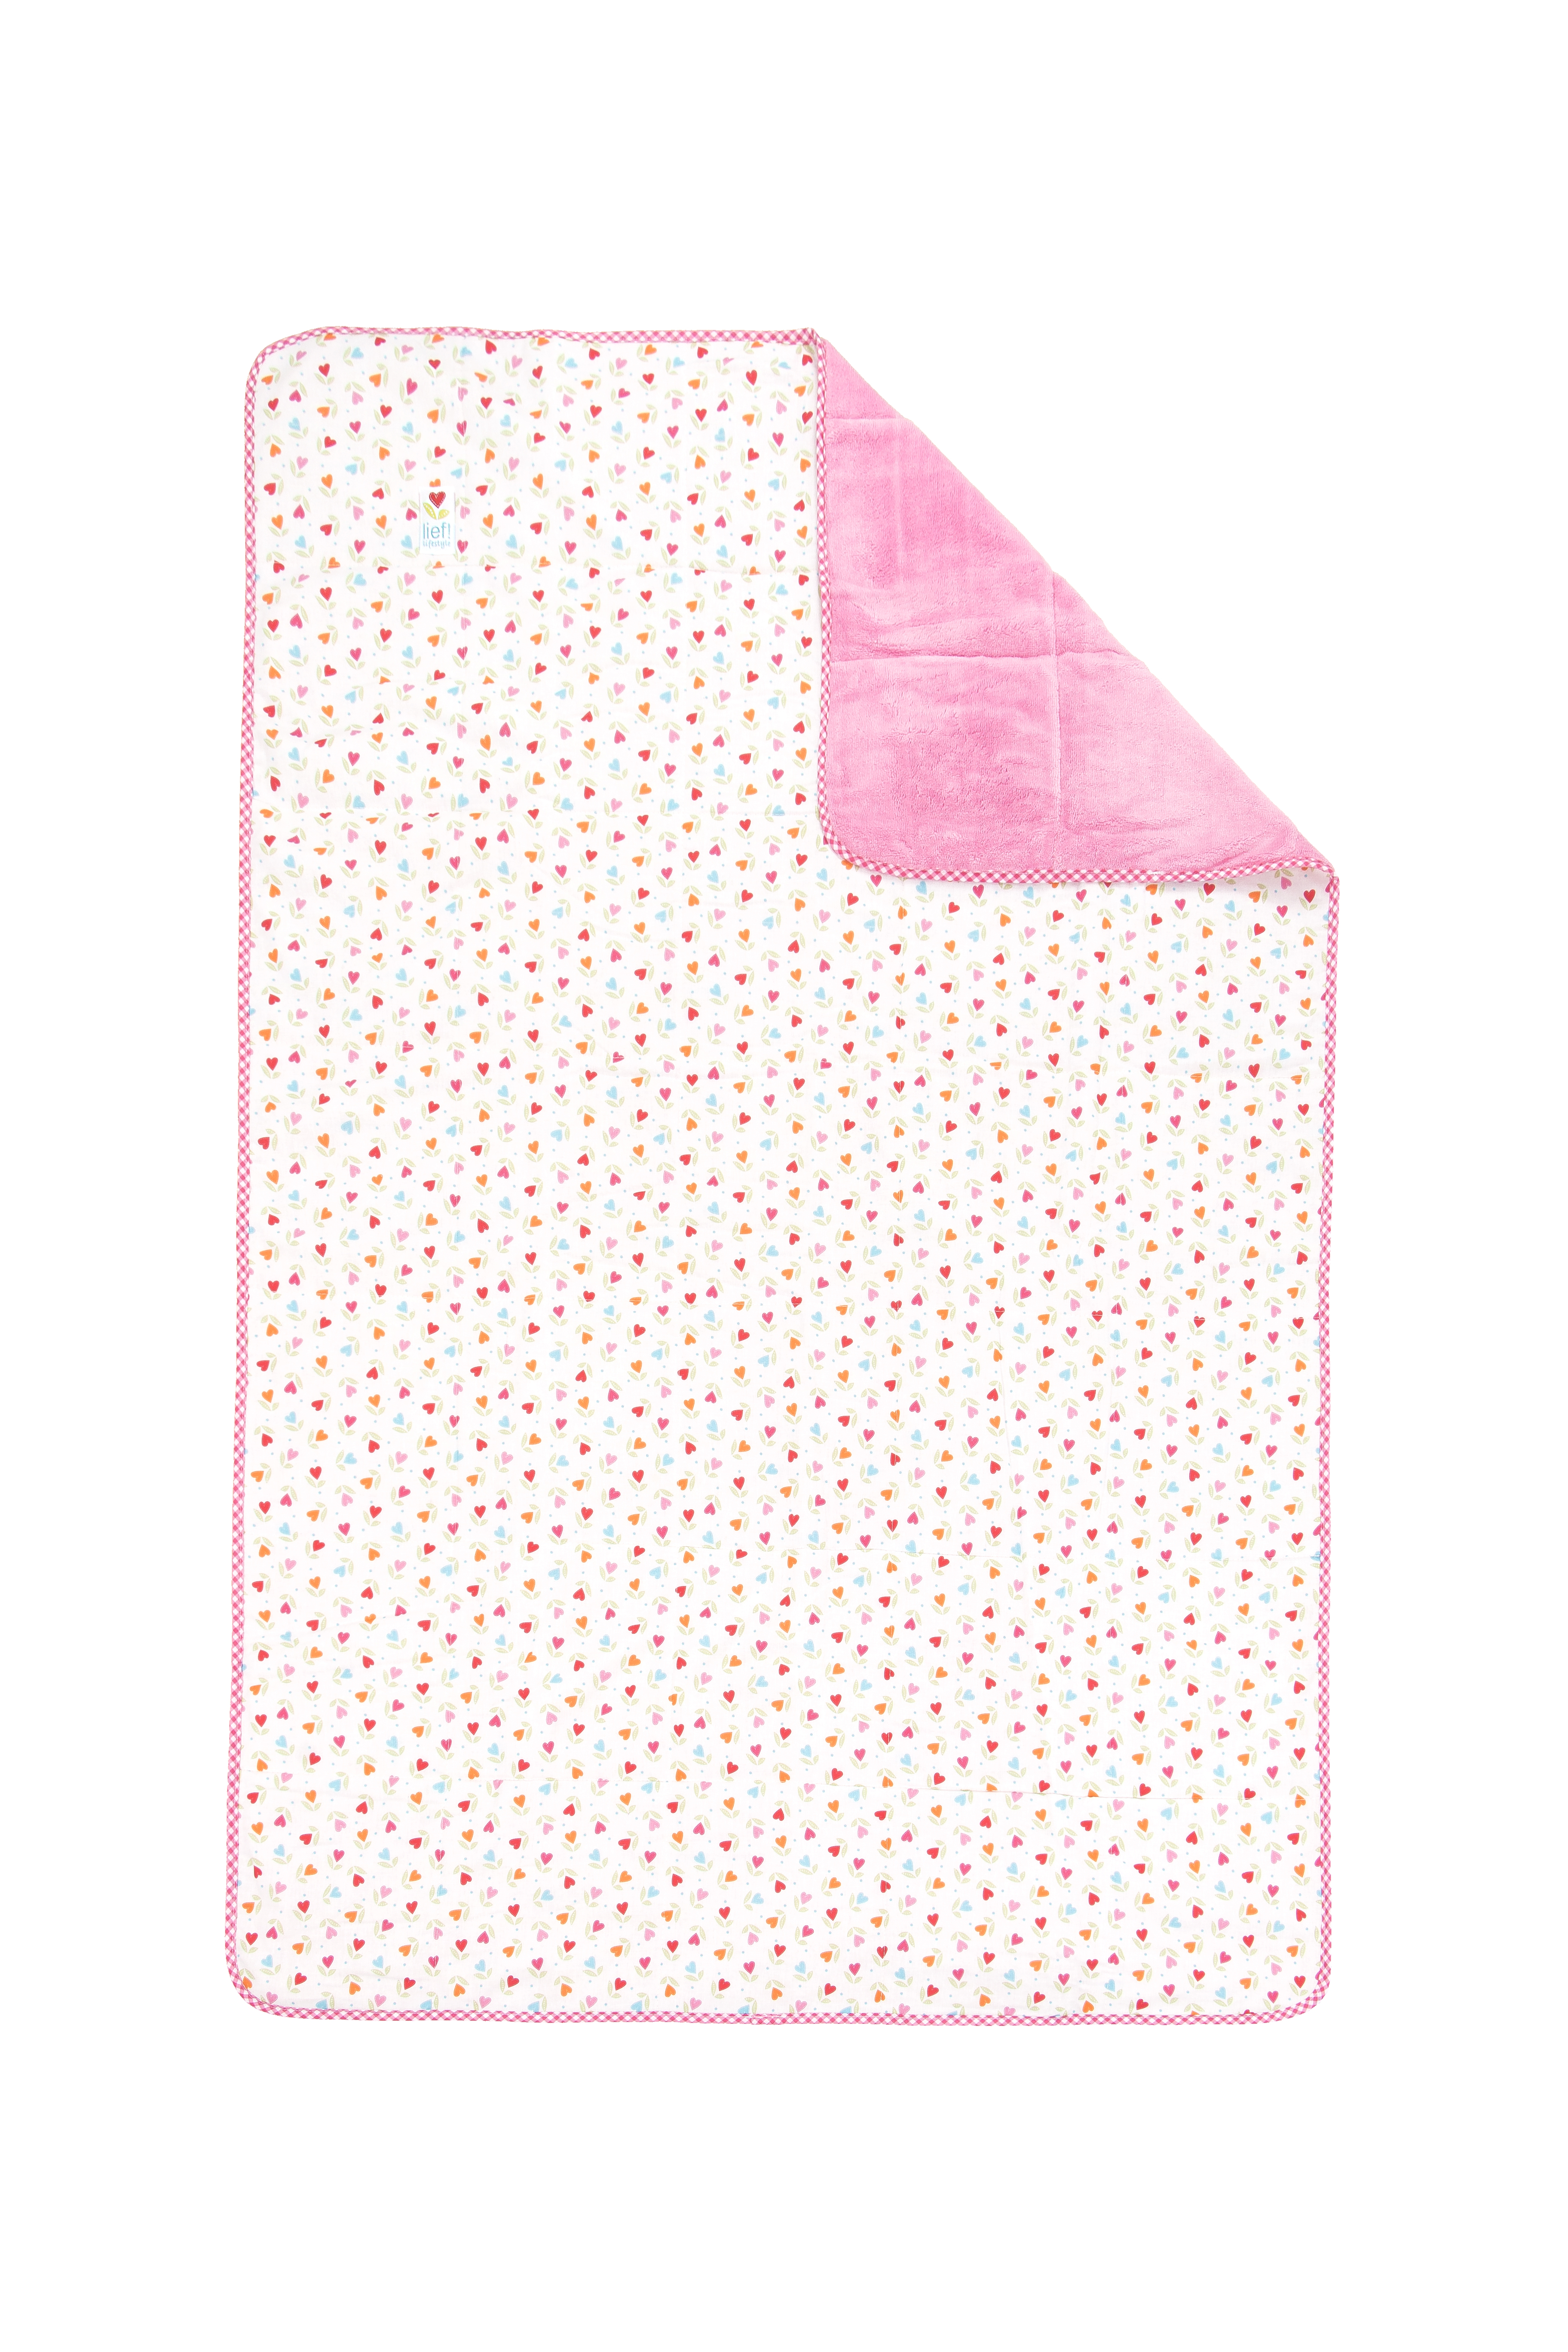 Quilted blanket Girl hearts, 100x150 cm